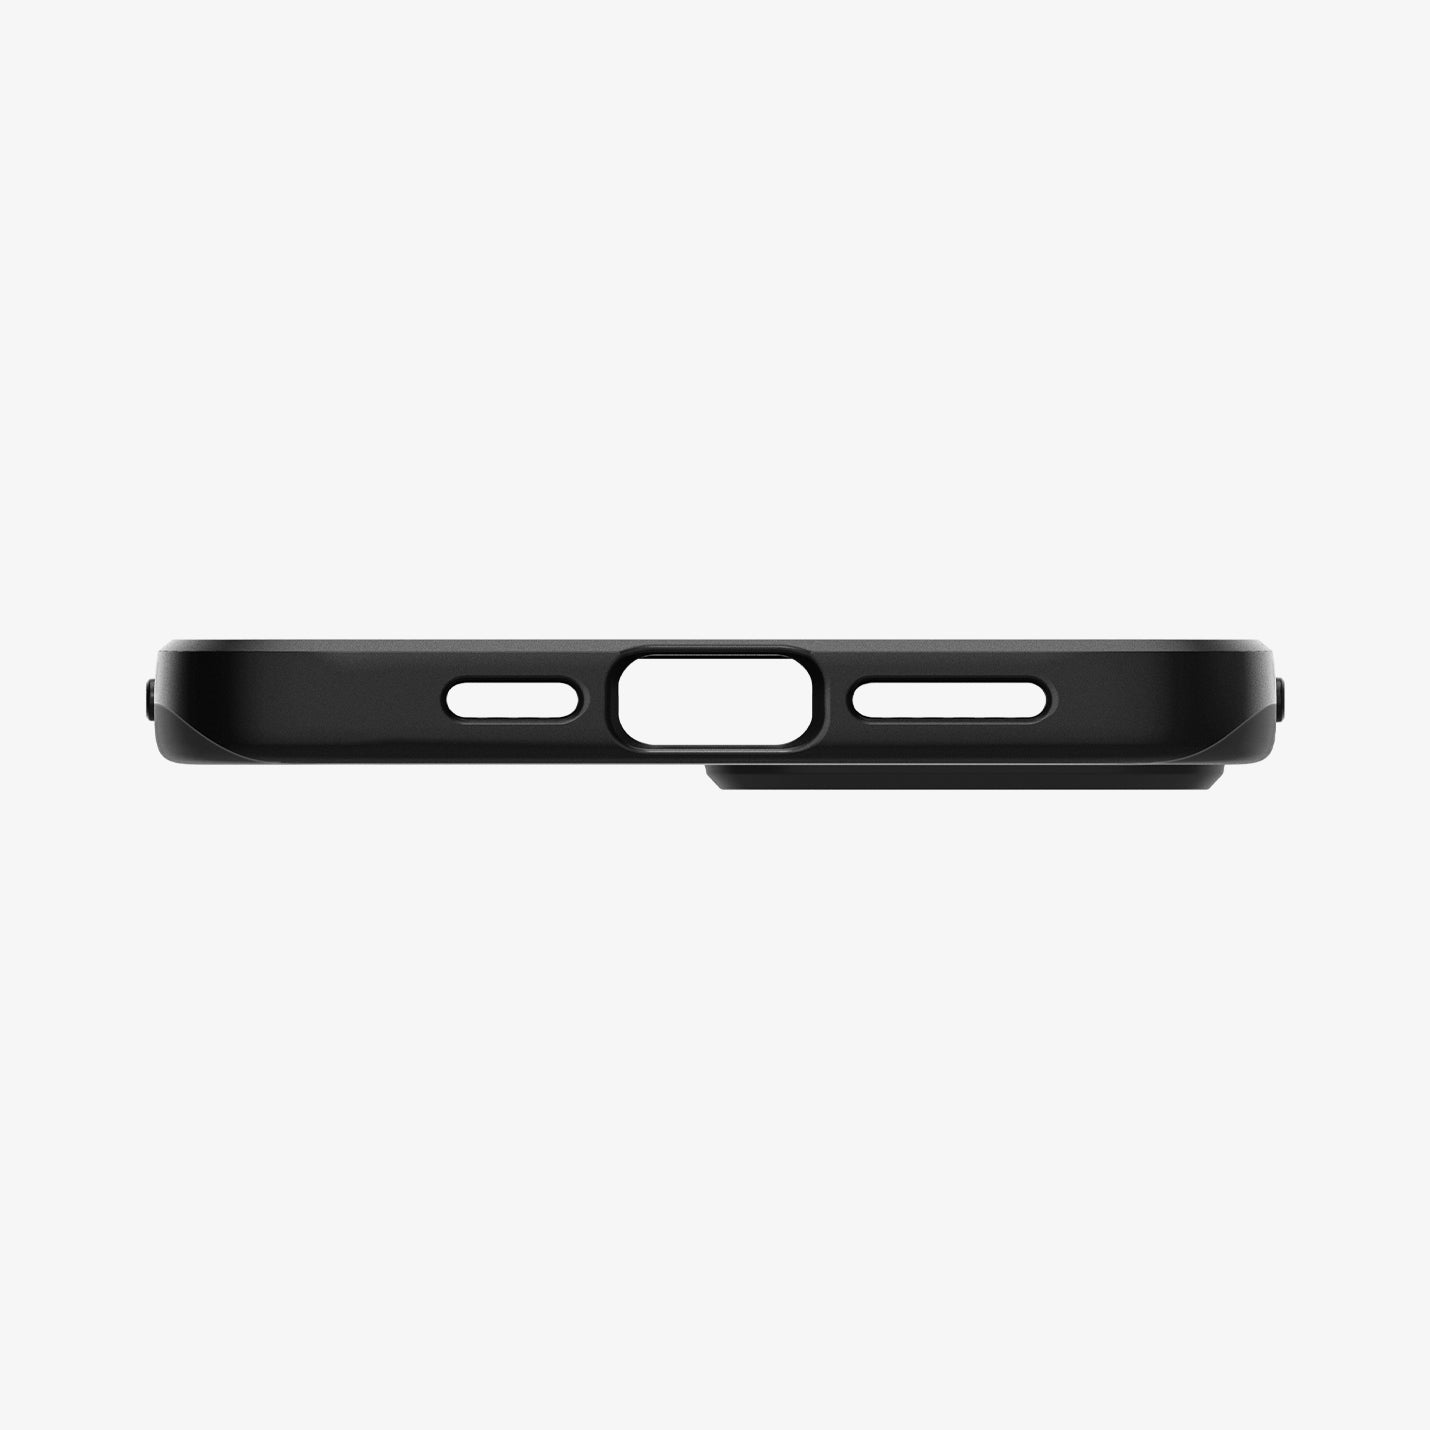 ACS01612 - iPhone 12 Pro Max Case Thin Fit in black showing the bottom with precise cutouts